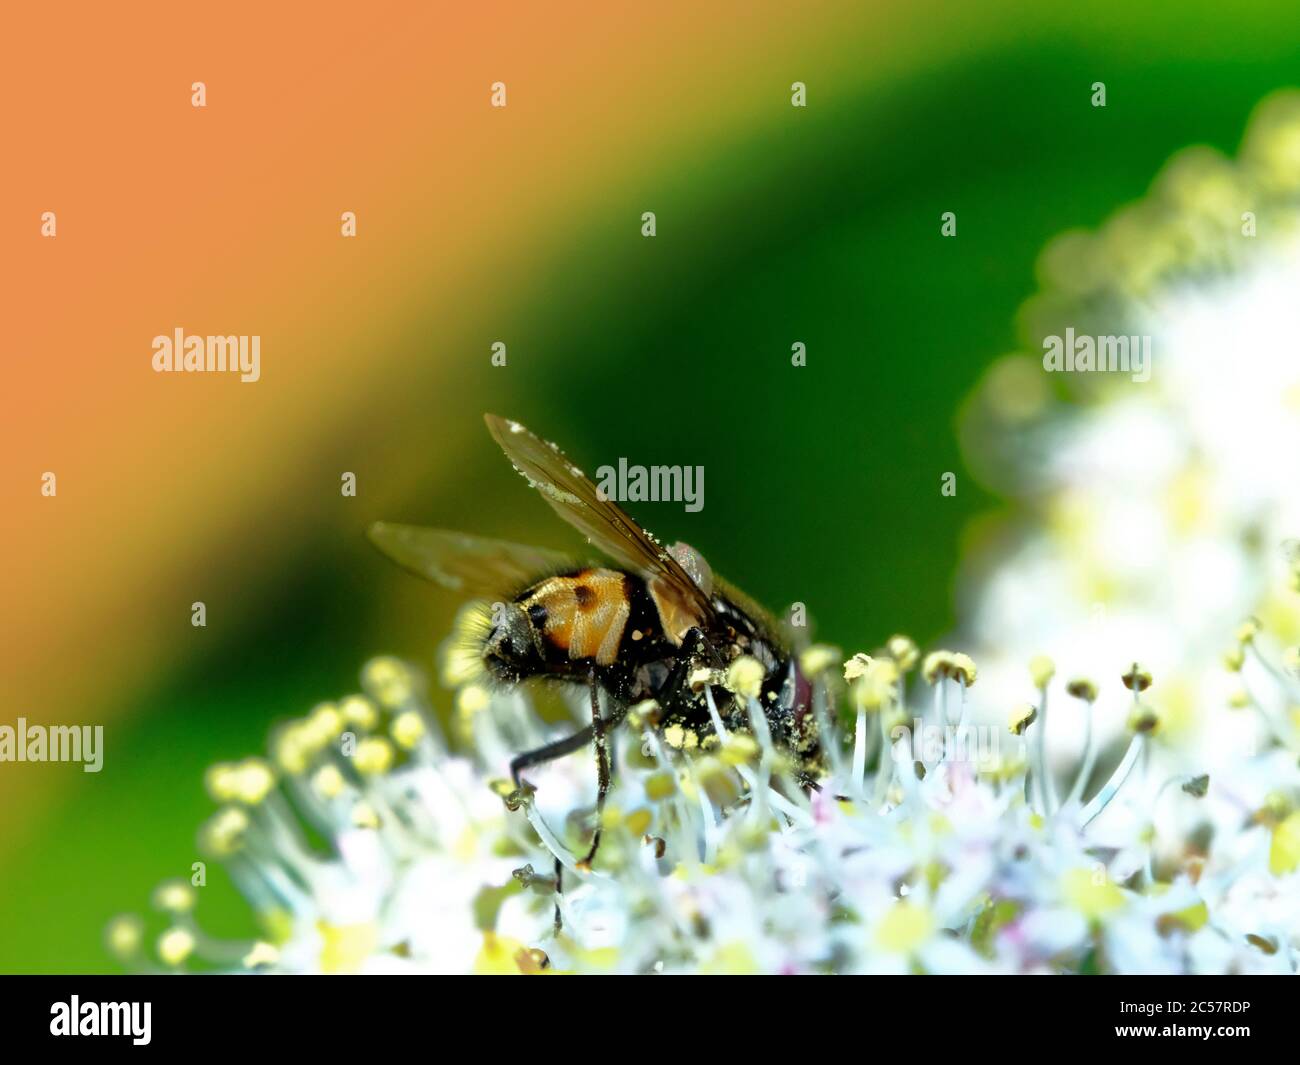 Pollen covered hairy hover fly  harvesting a spring flower Stock Photo